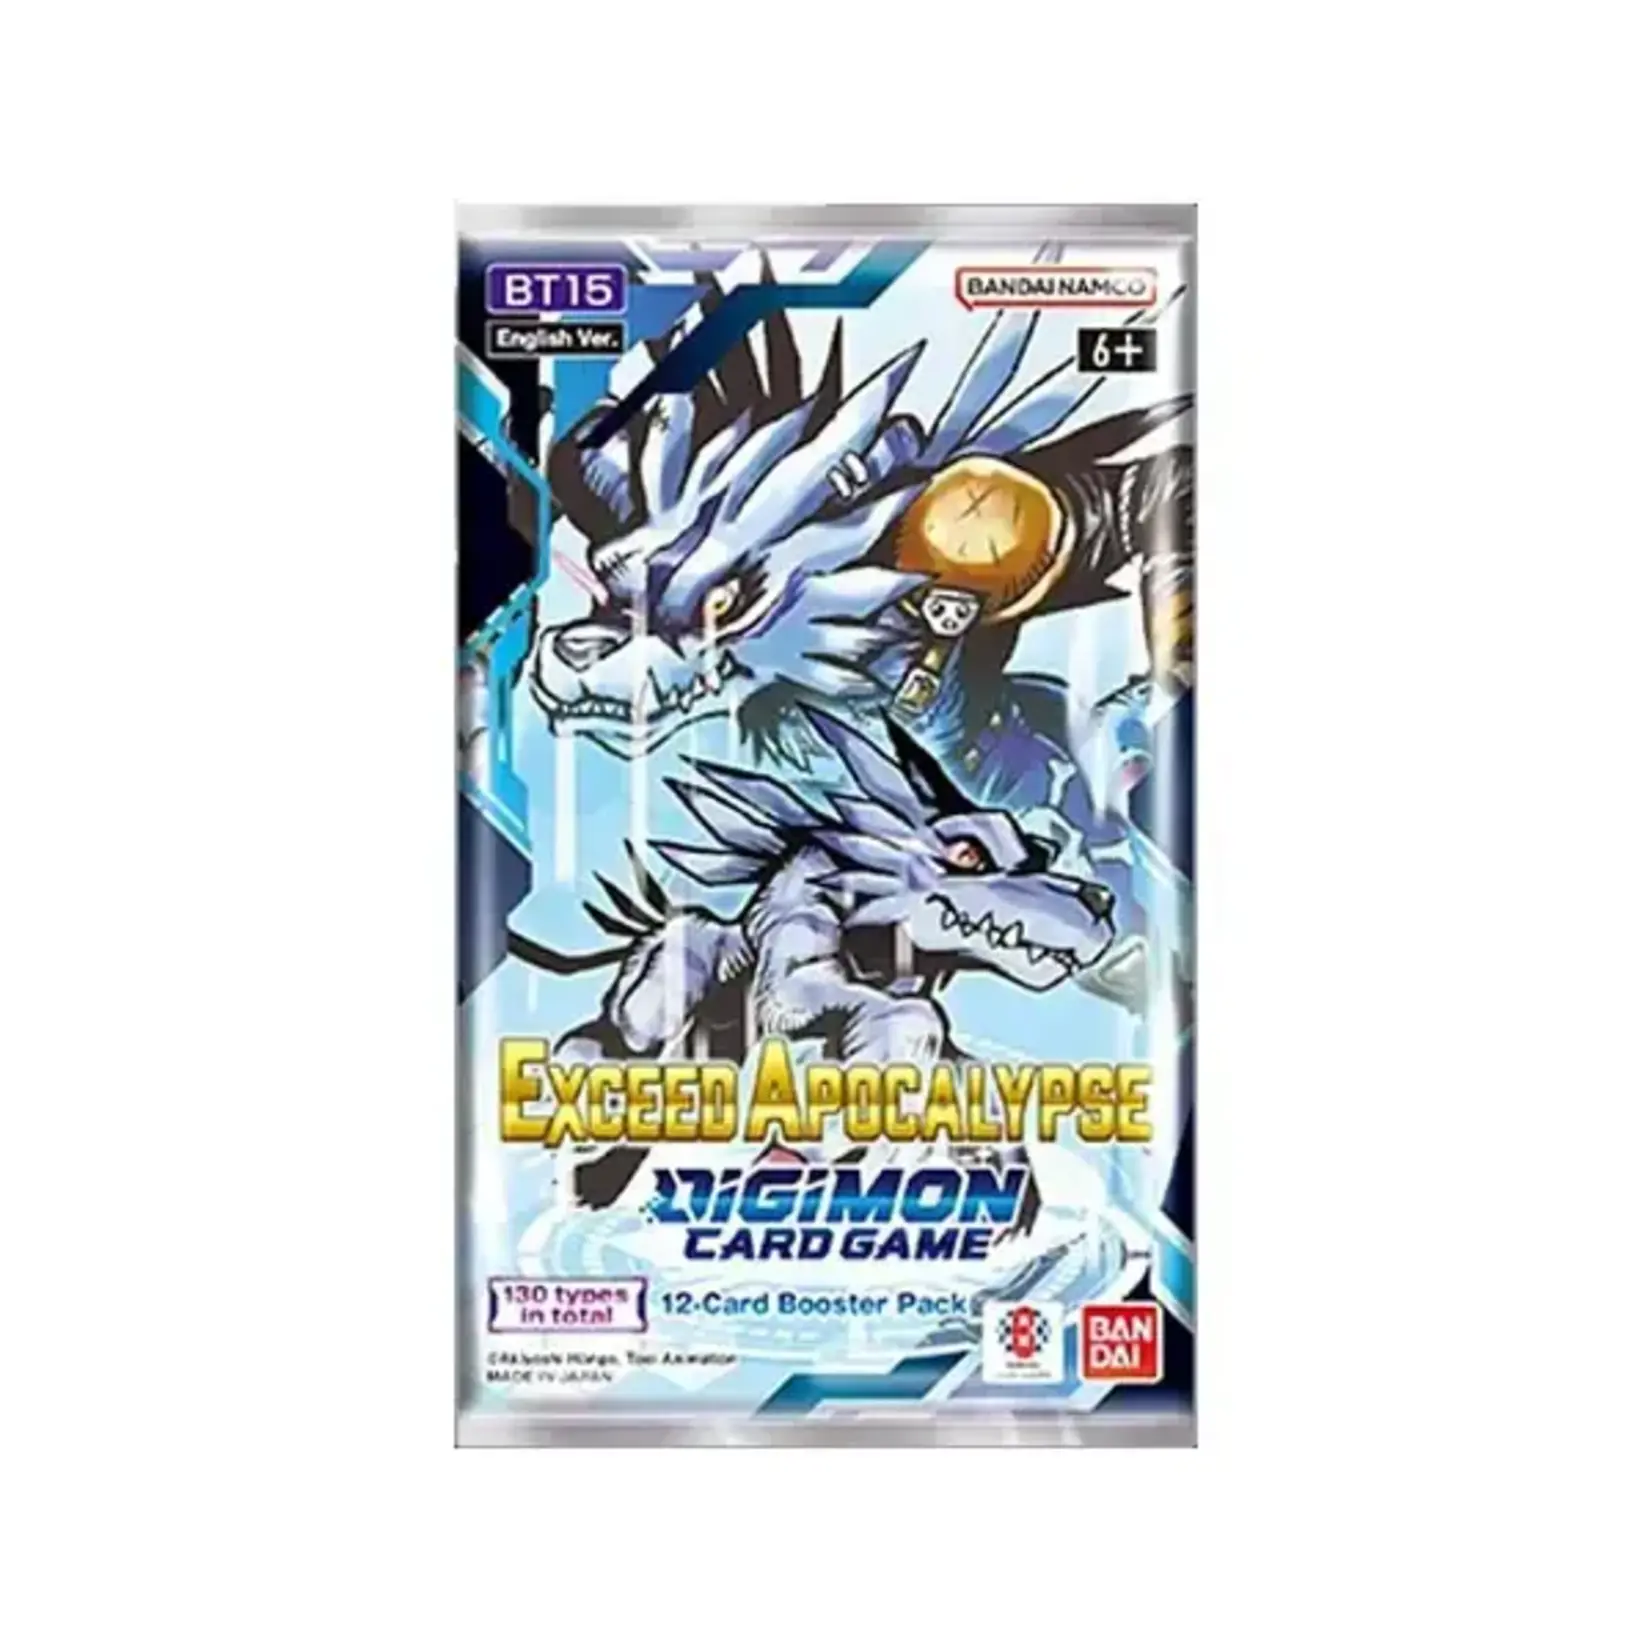 Digimon: Exceed Apocalypse Booster Pack (BT15)